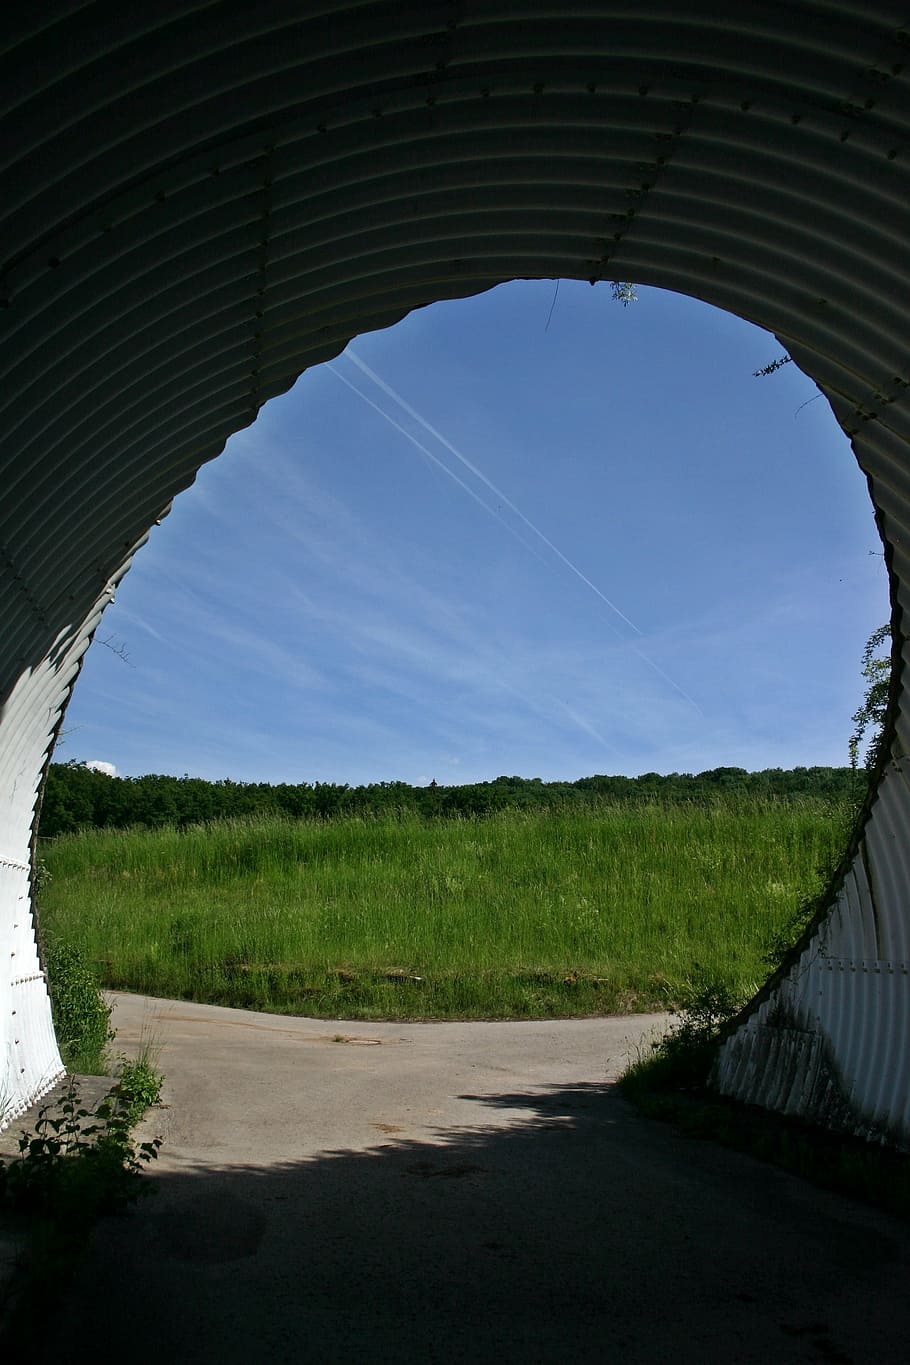 underpass, passage, away, tunnel, road, meadow, summer, sky, go through, shadow